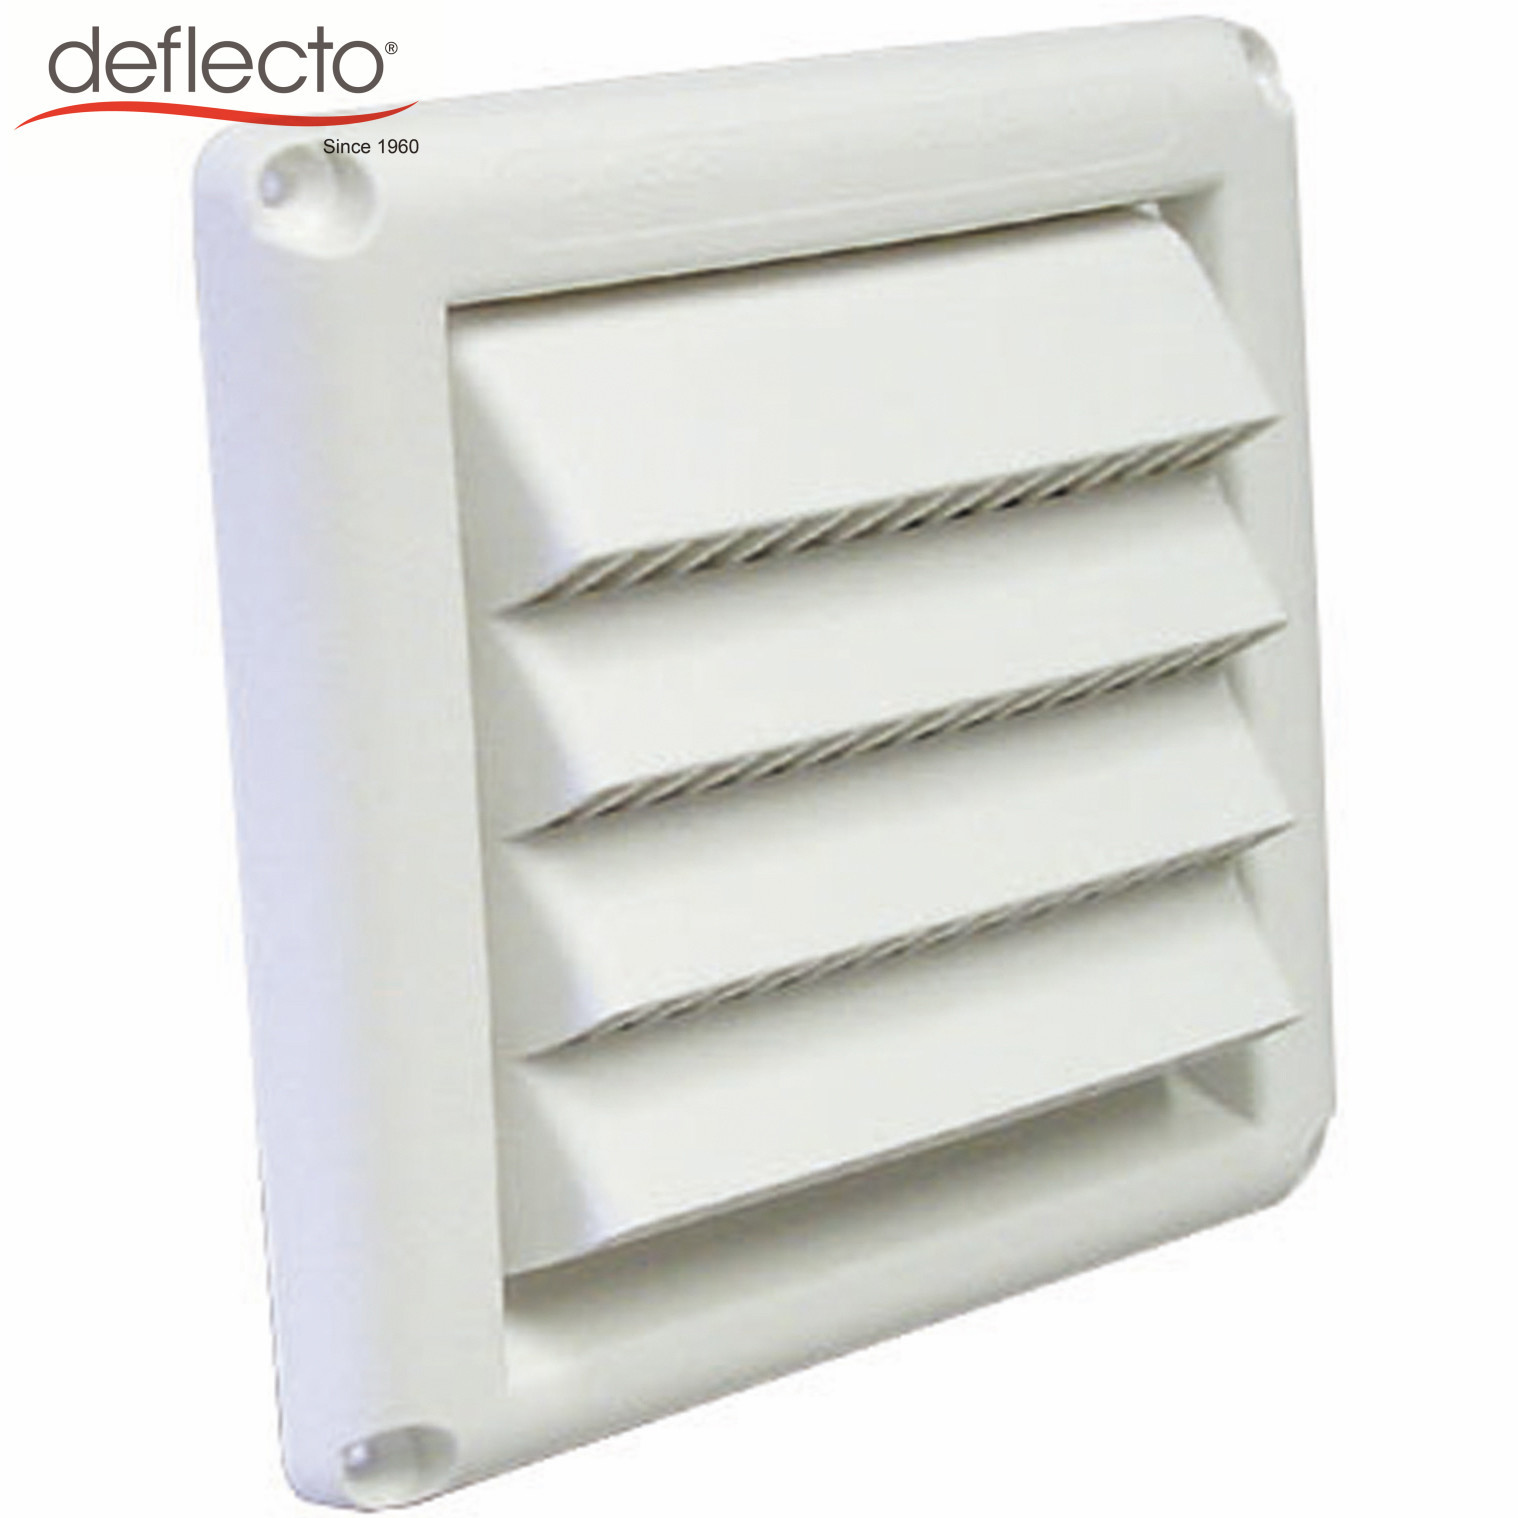 6Inch Louvered Dryer Air Vent Cap Cover with Pest Guard Metal Screen White Vents Building